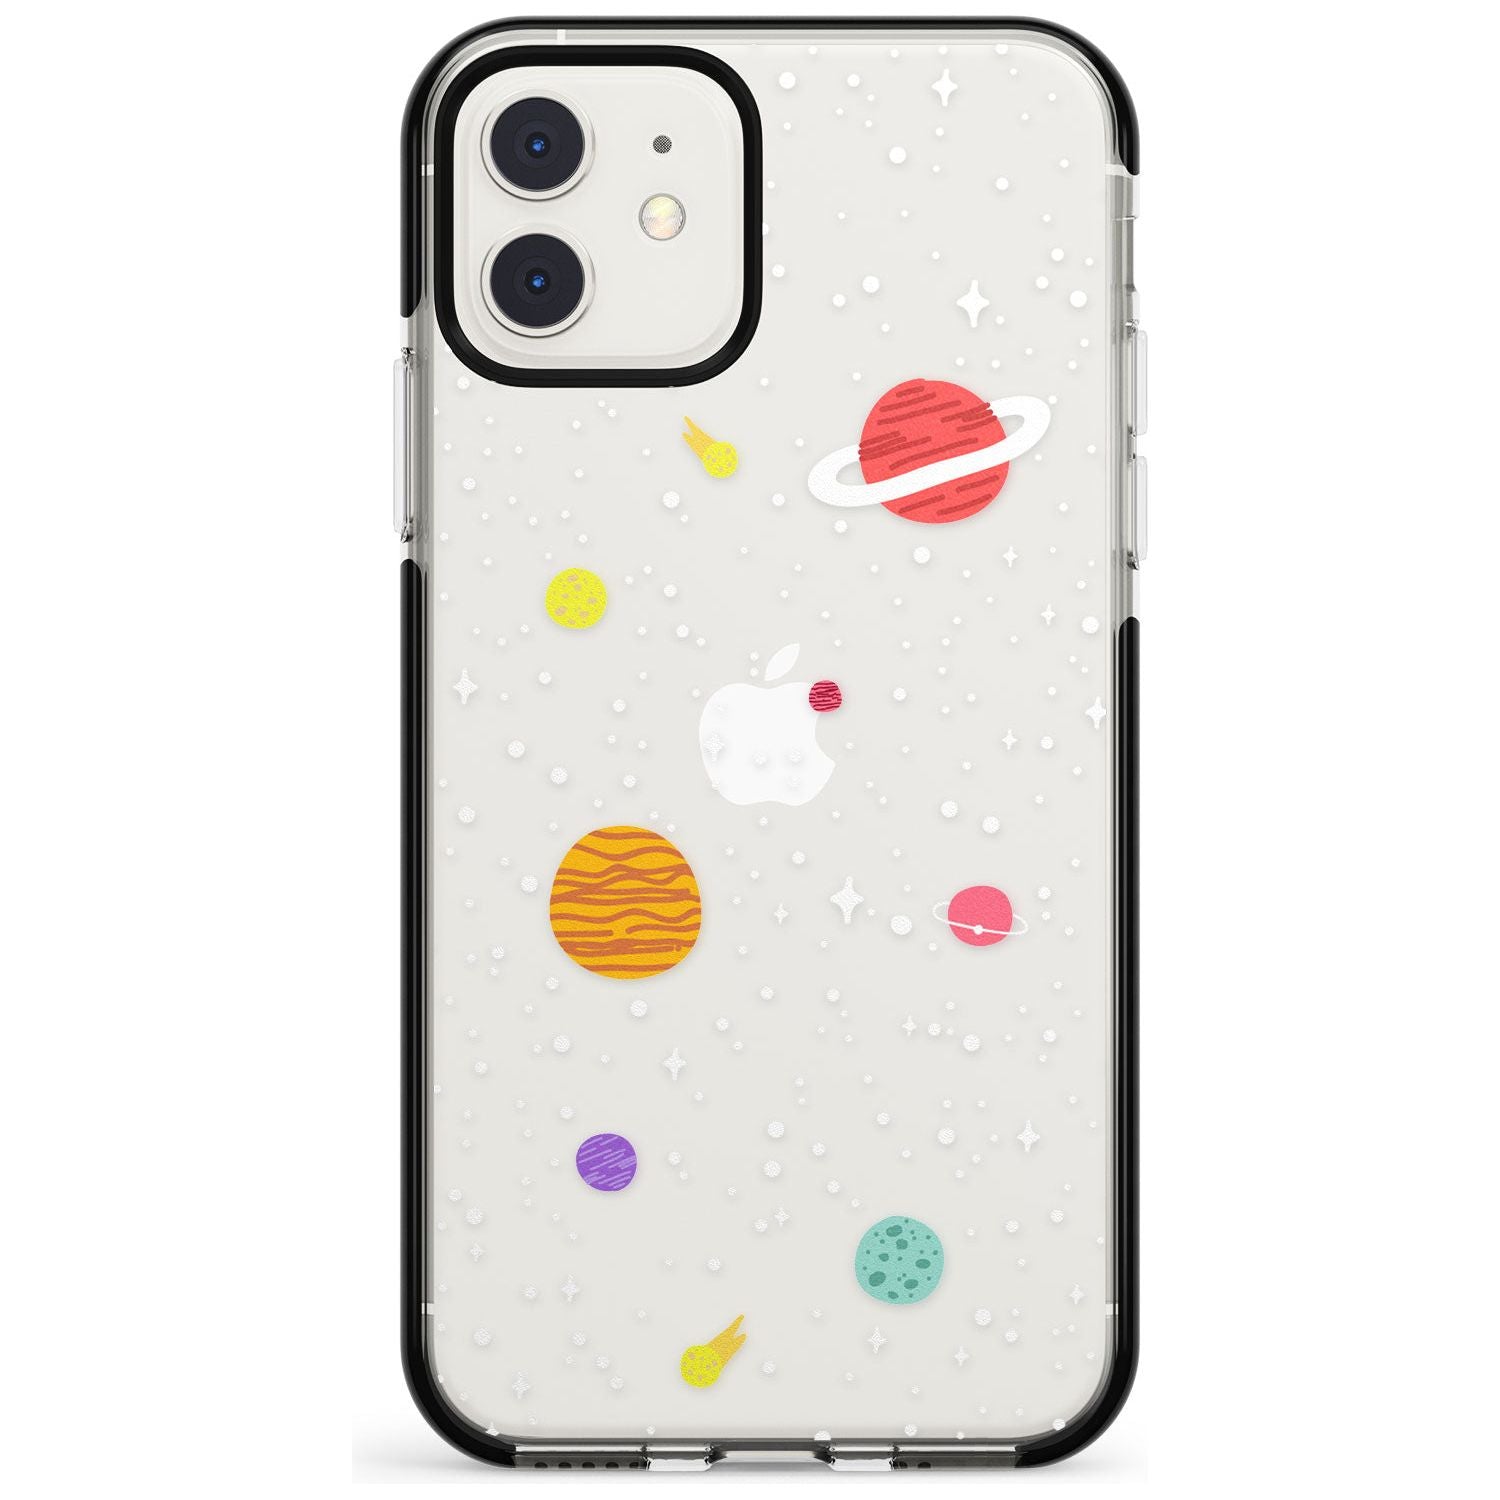 Cute Cartoon Planets (Clear) Black Impact Phone Case for iPhone 11